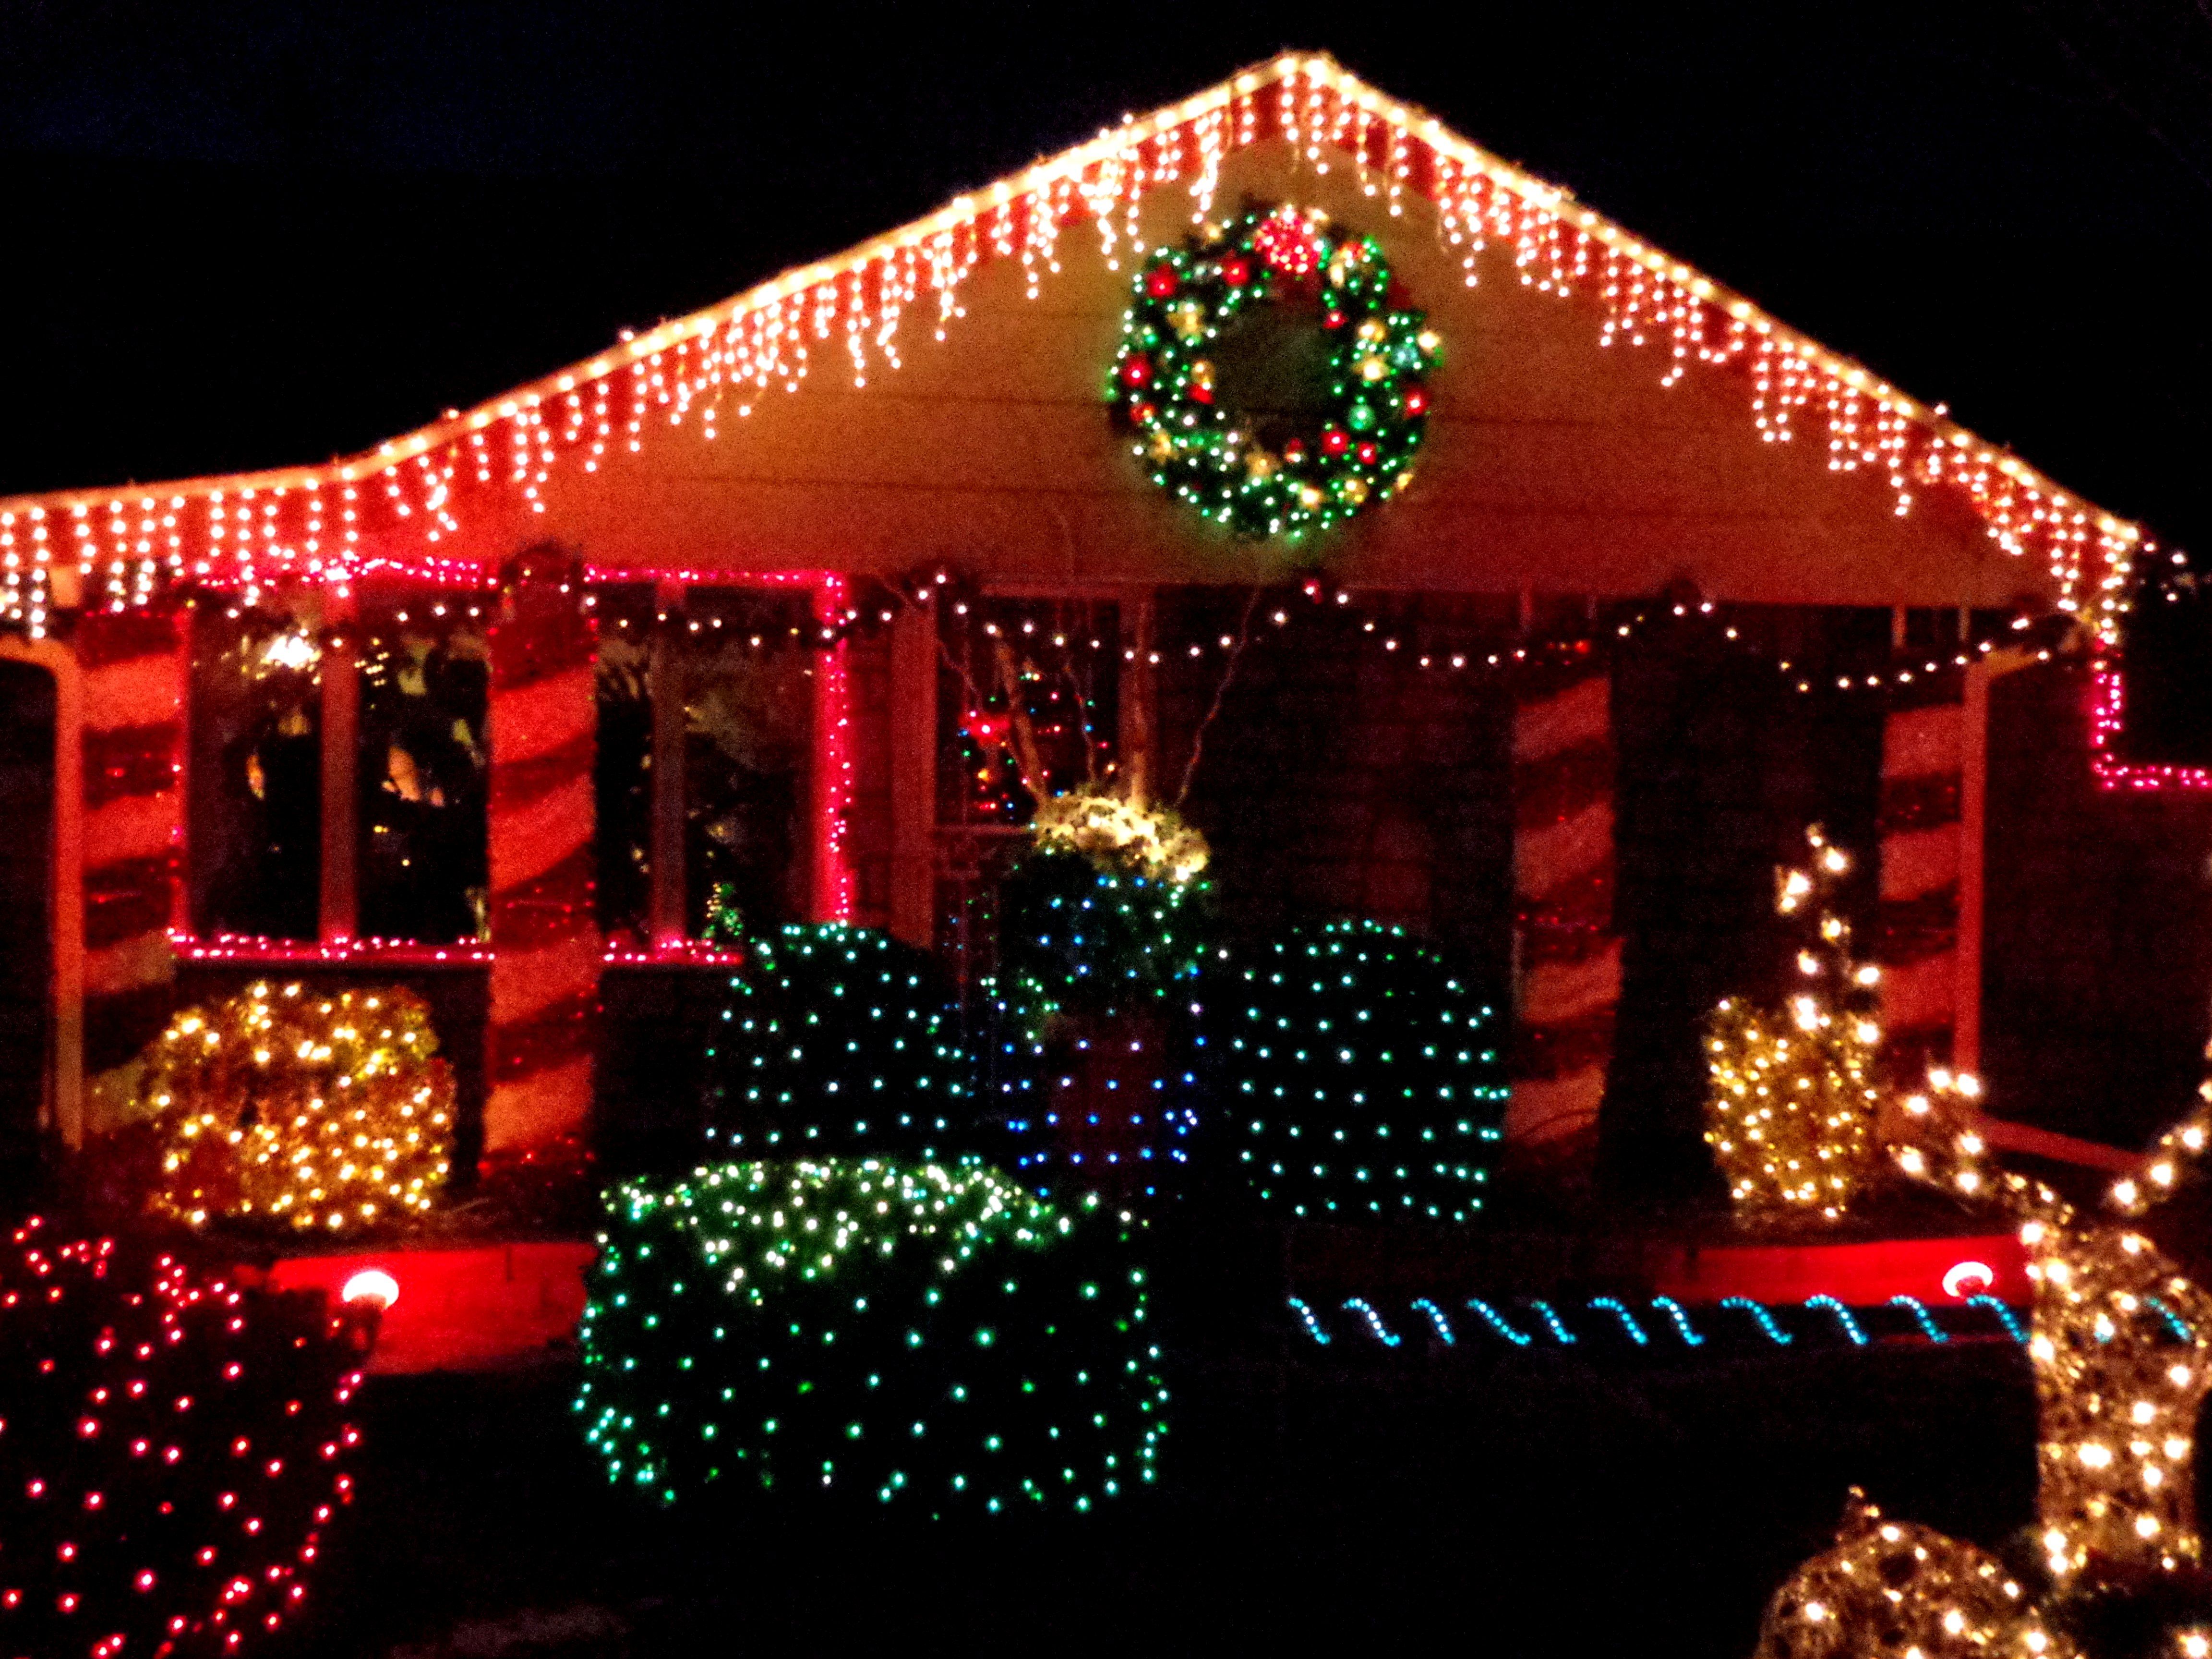 Christmas Lights Decorating House Picture. Free Photograph. Photo Public Domain